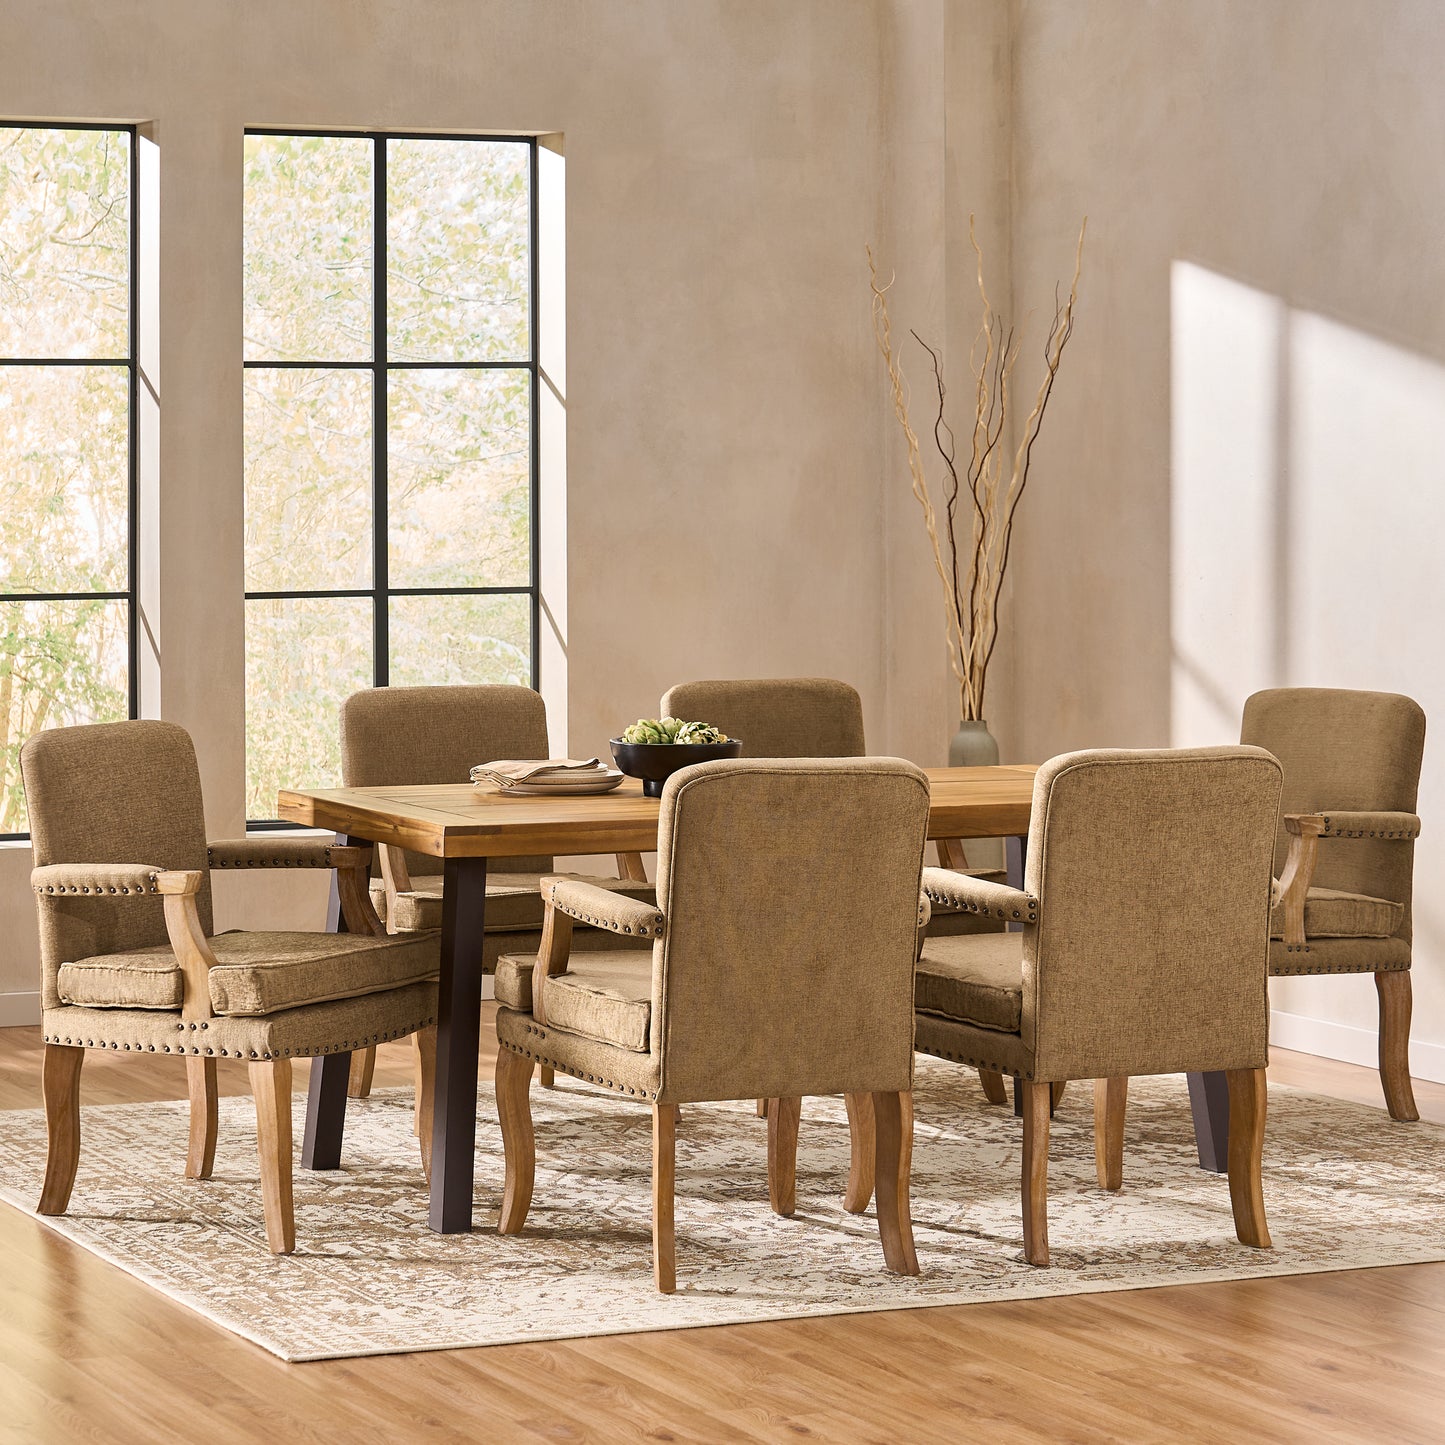 Tim French Country Fabric Dining Arm Chair with Nailhead Trim, Set of 6